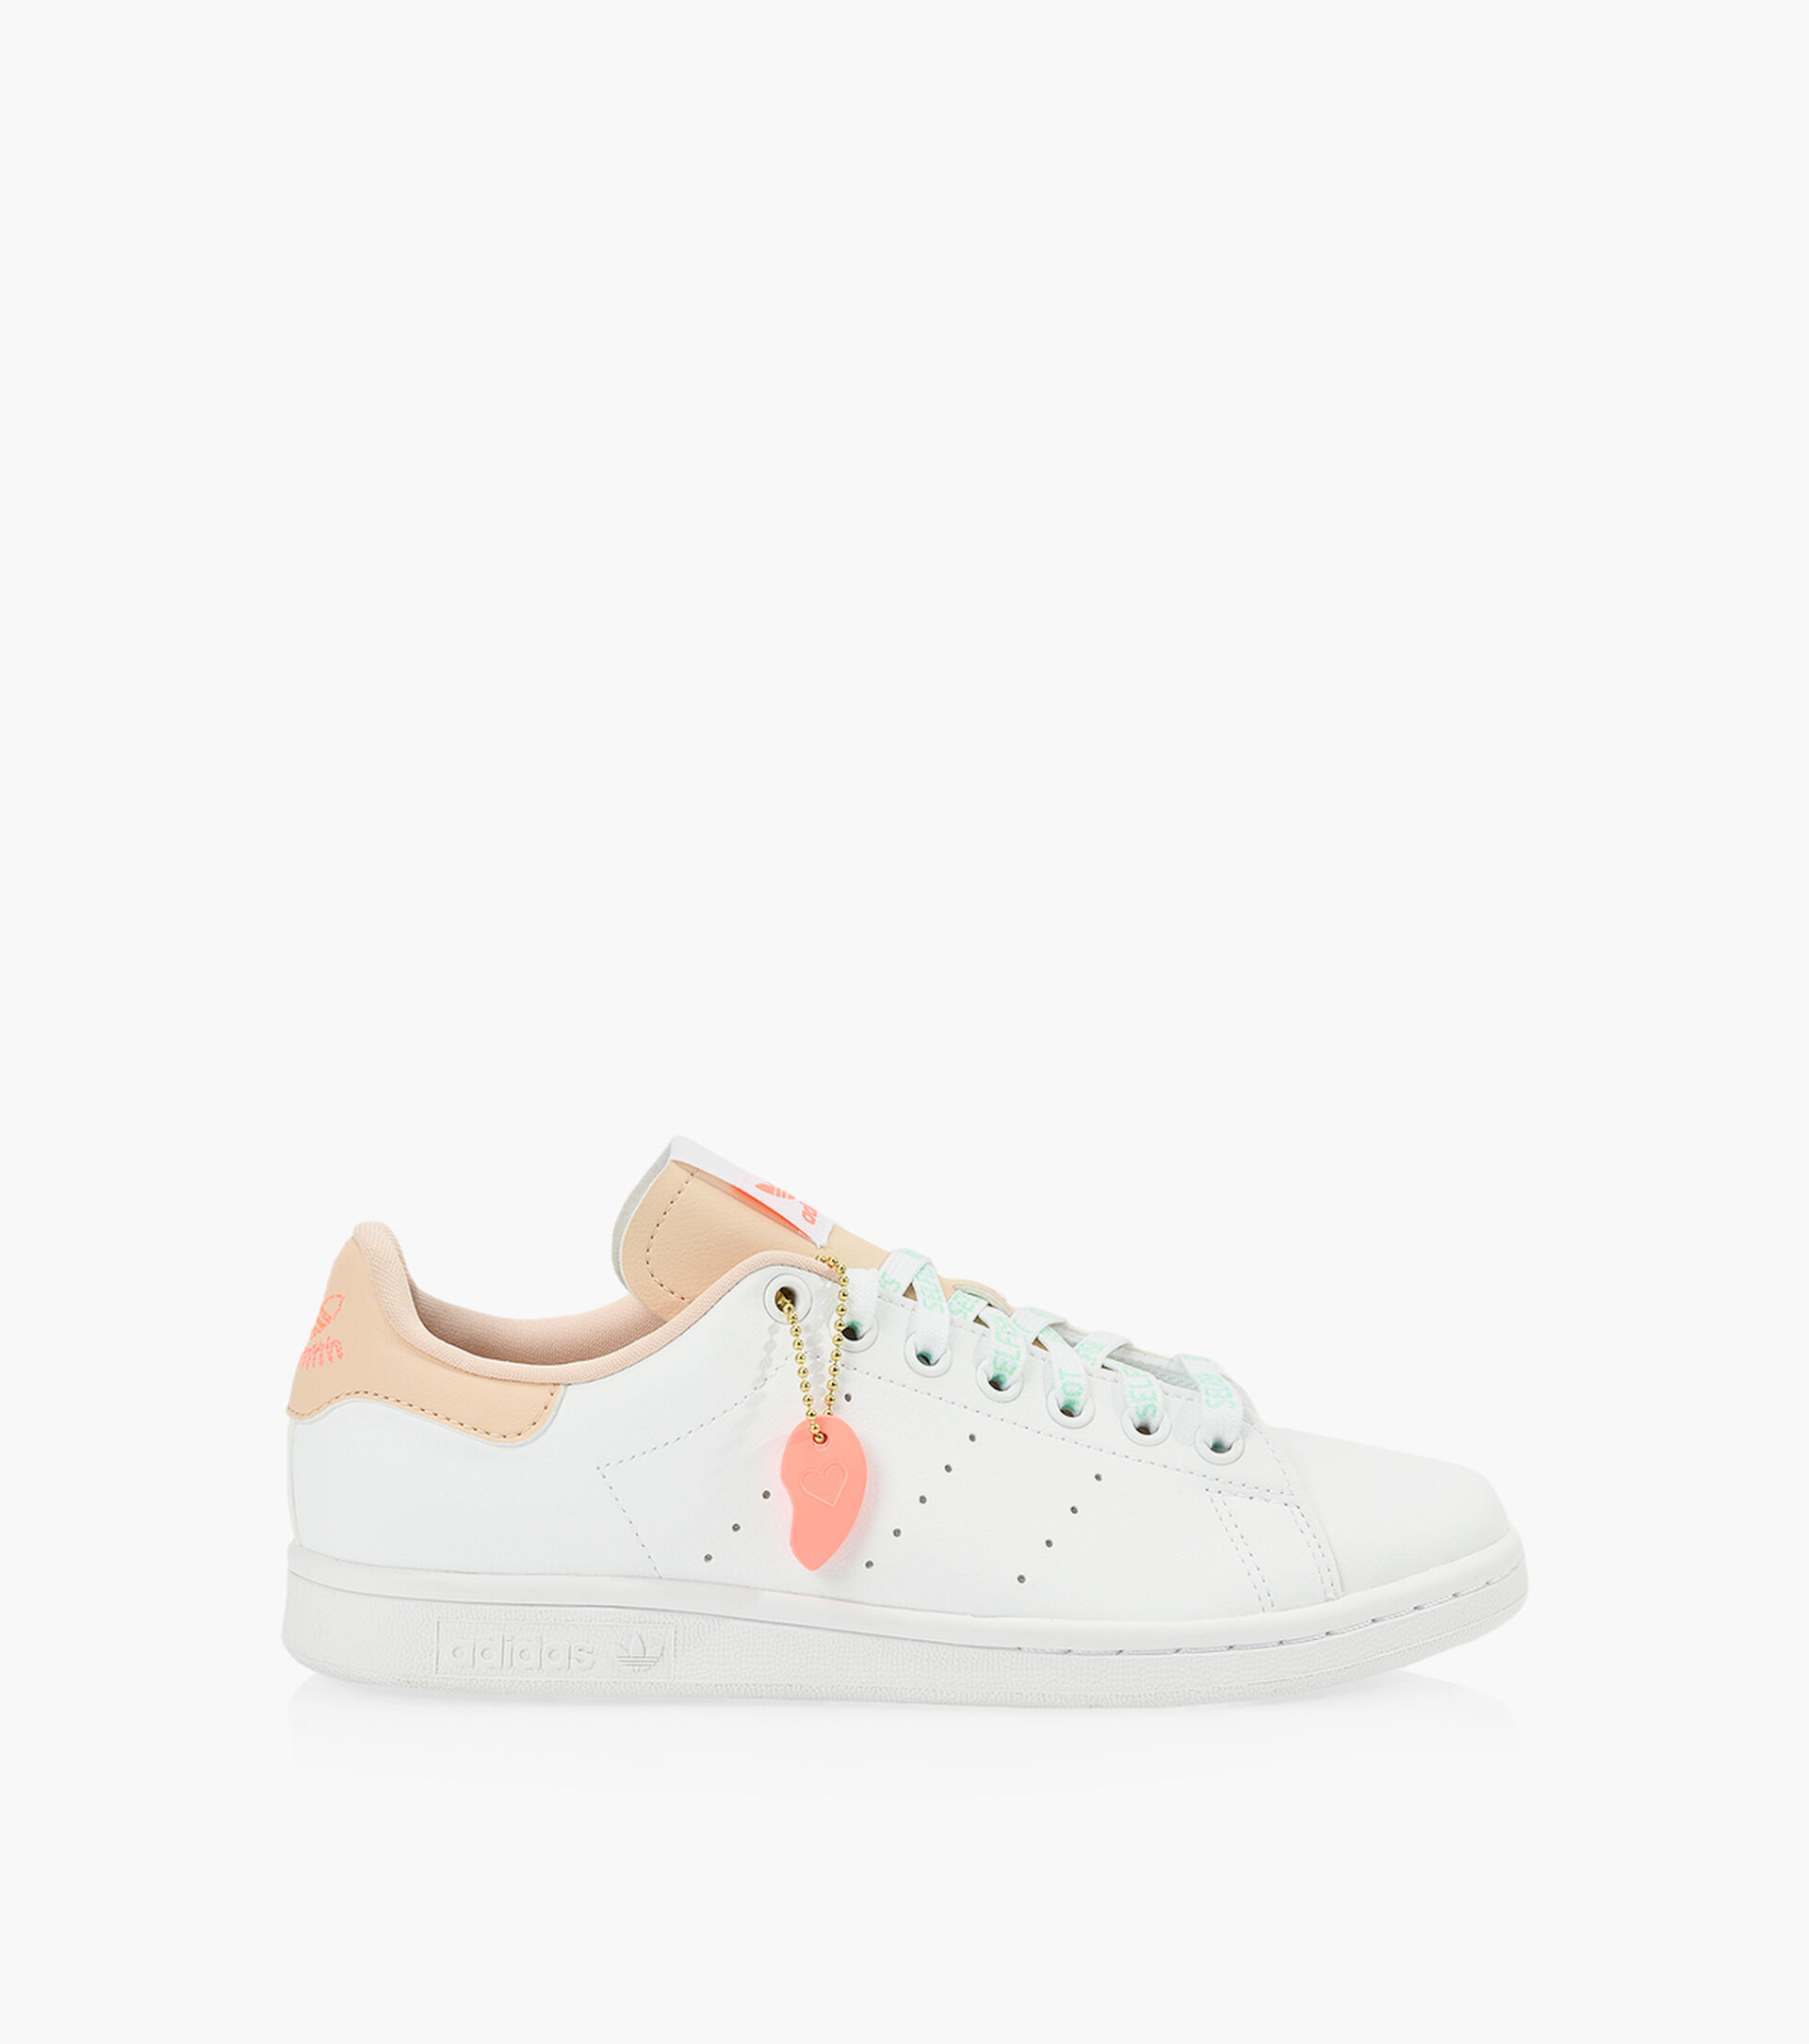 ADIDAS STAN SMITH W - White Synthetic | Browns Shoes